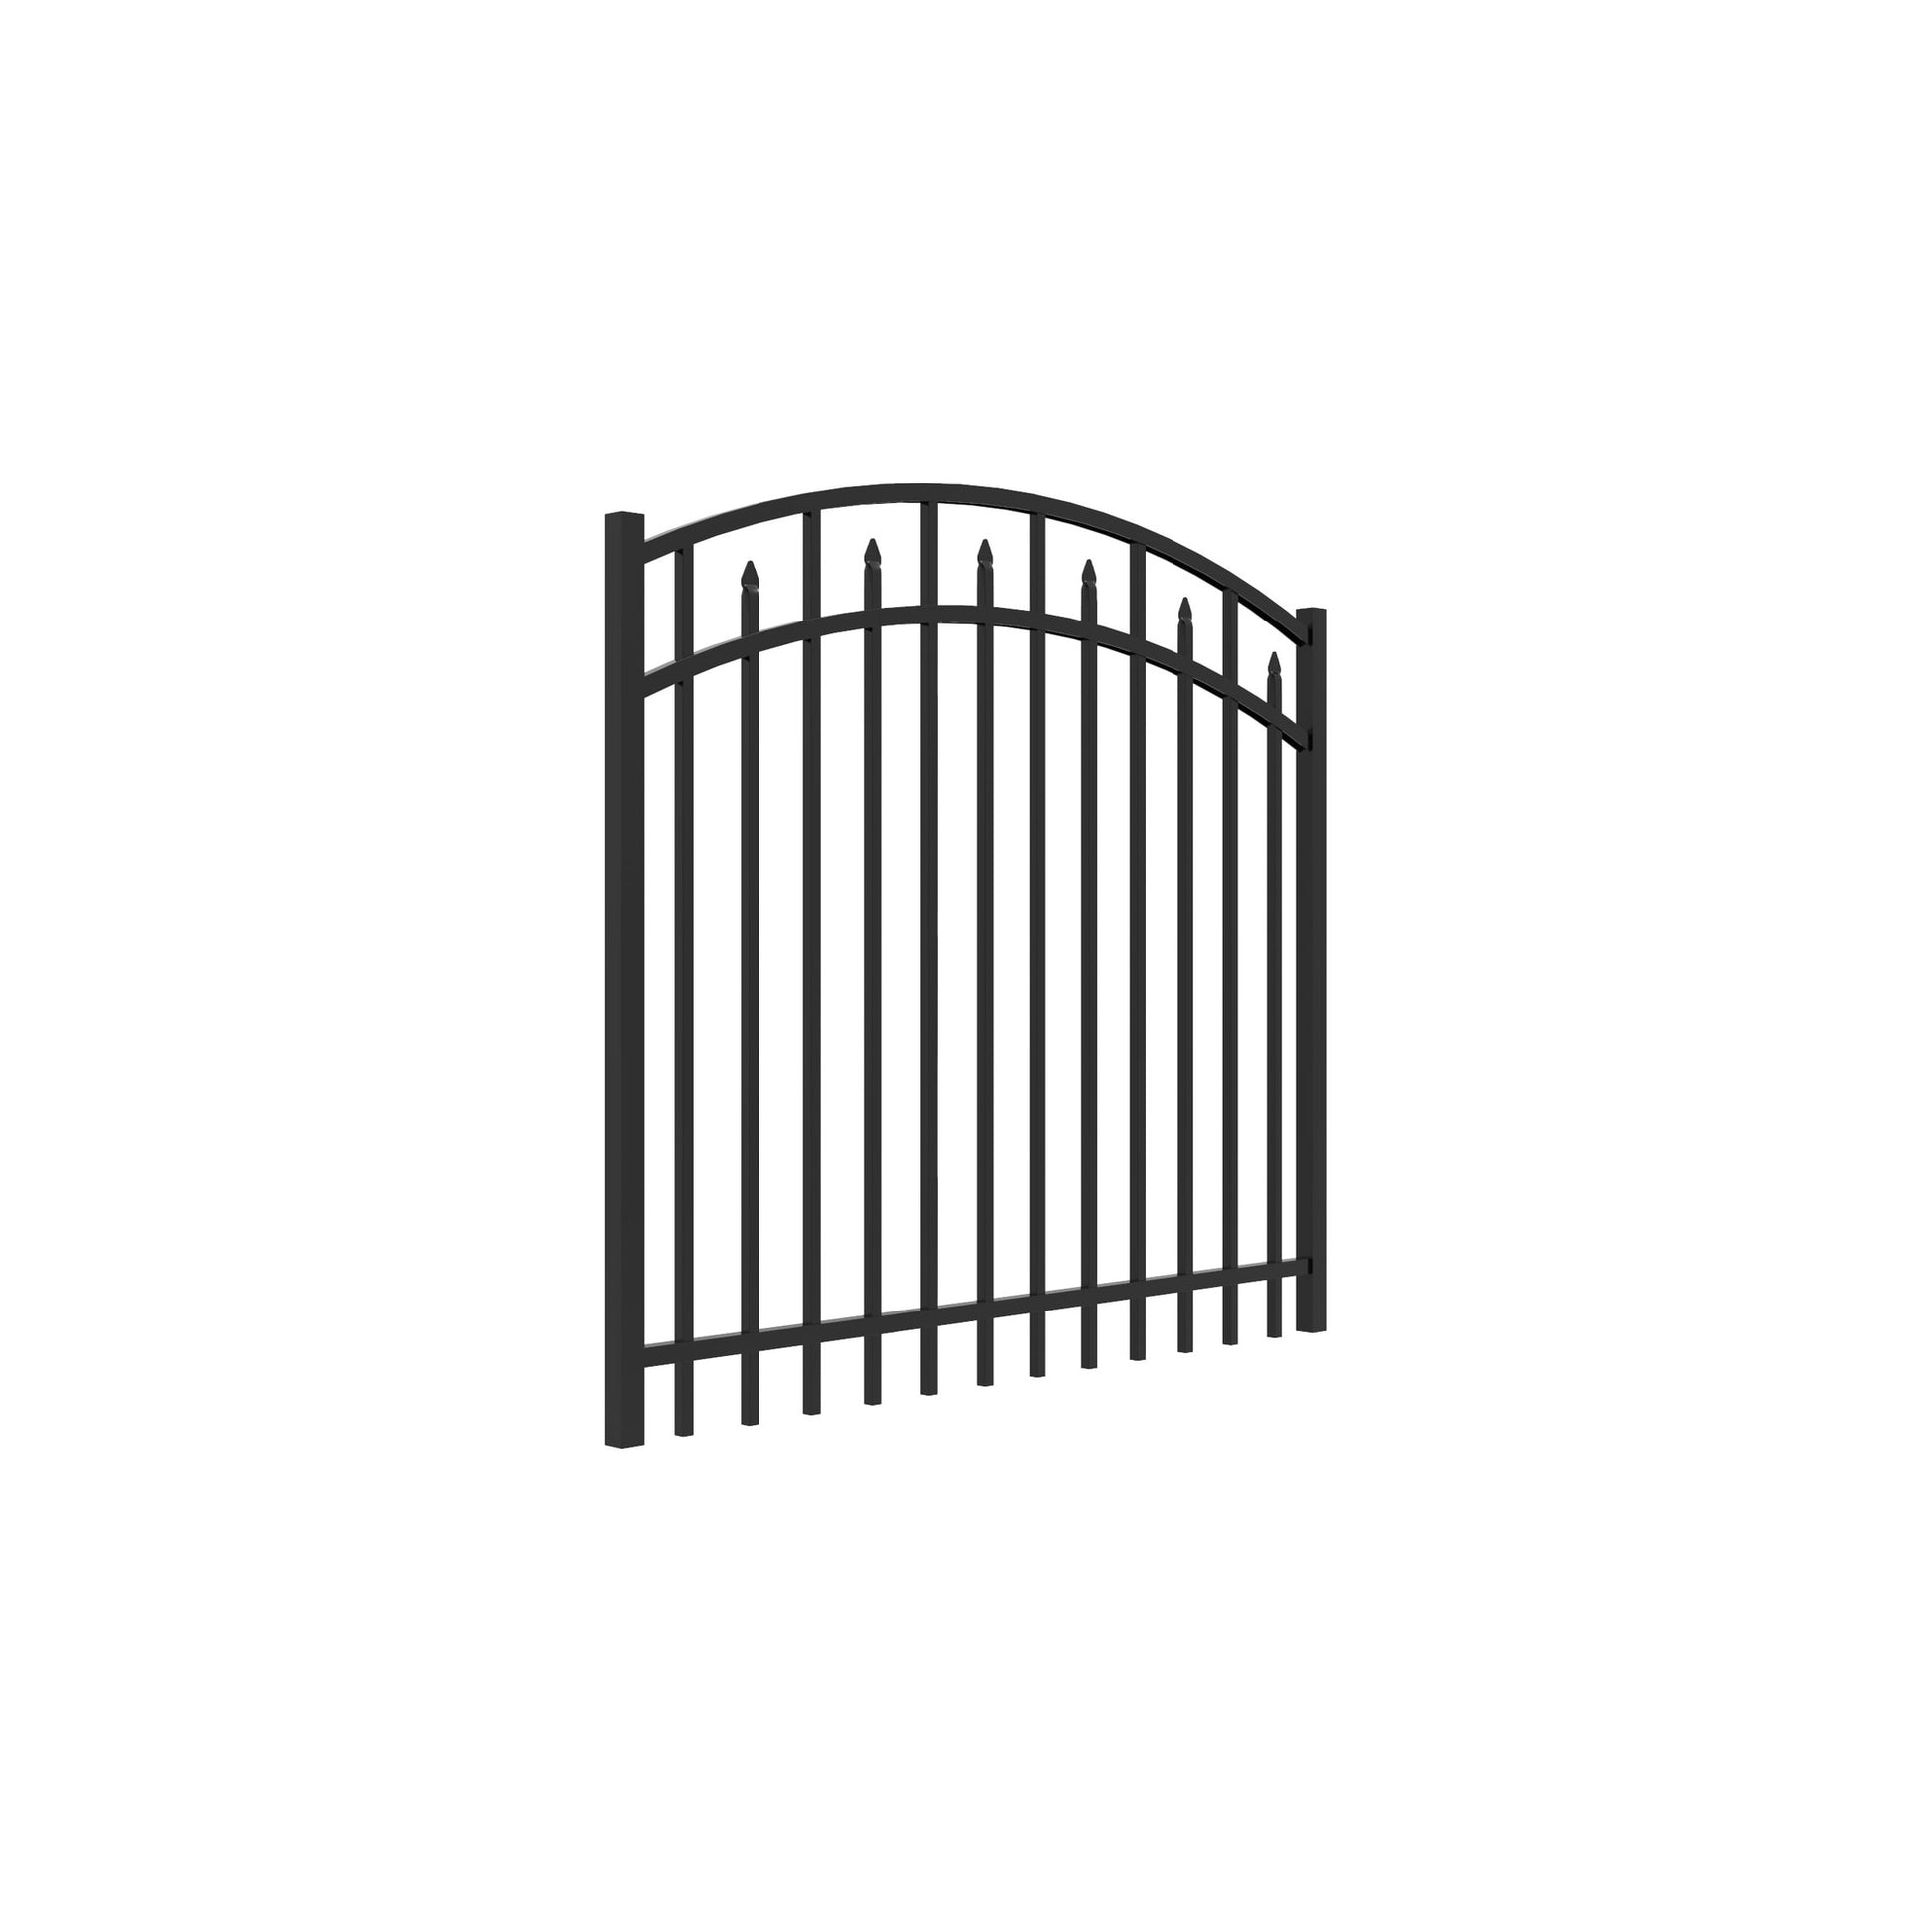 Amethyst Home Series - Arched Gate - 4' x 5'-Aluminum Fence Gates-ActiveYards-Black-FenceCenter